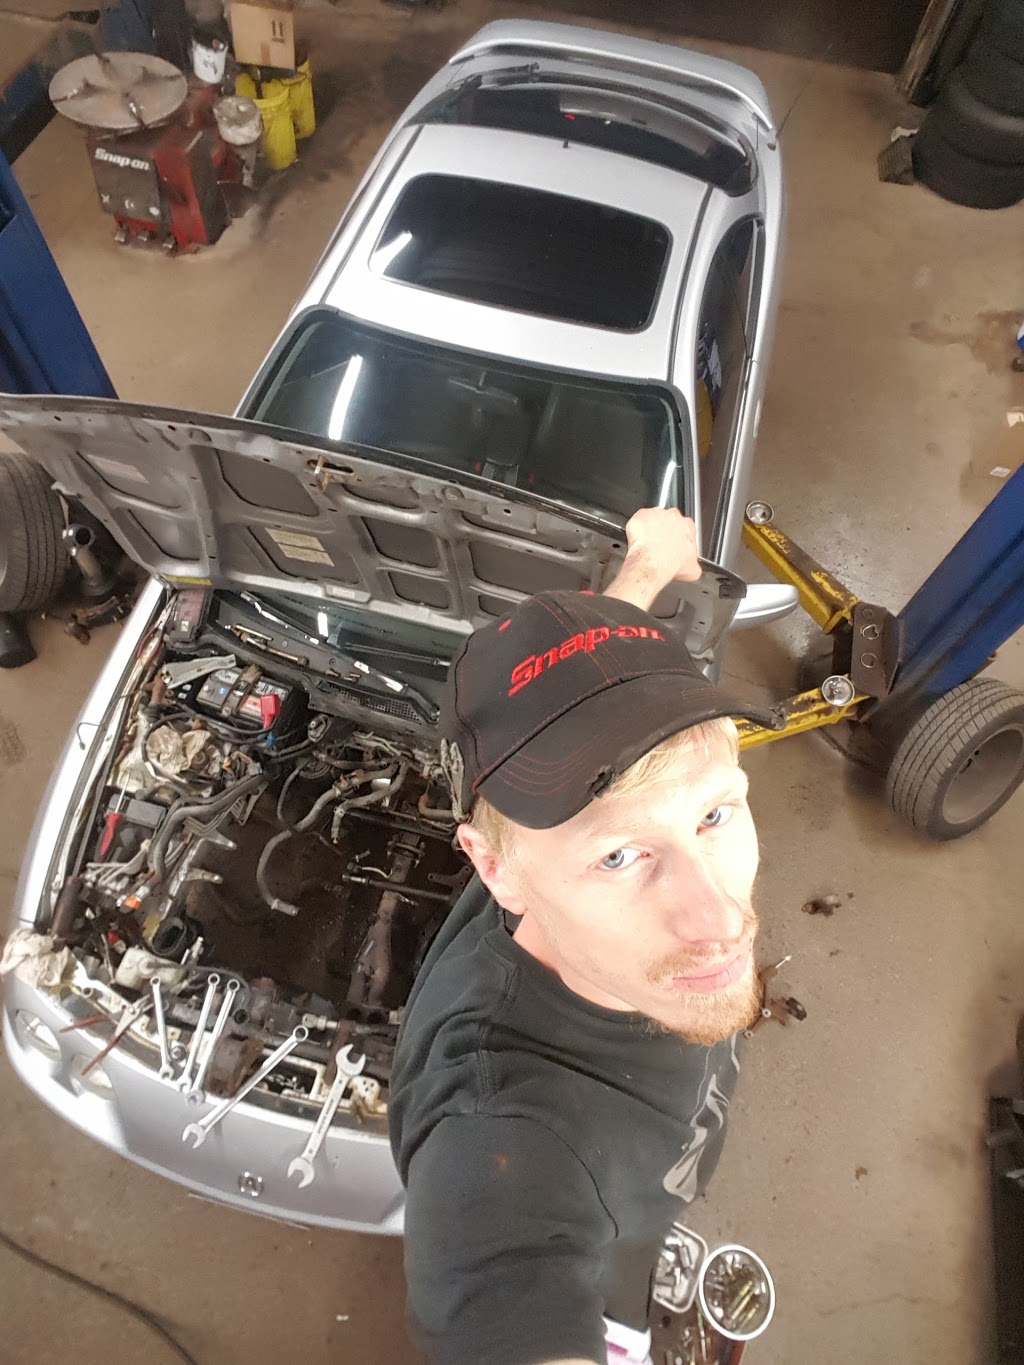 Hergotts Autotech Inc | car repair | 963 Guelph St, Kitchener, ON N2H 5Z2, Canada | 5195787752 OR +1 519-578-7752